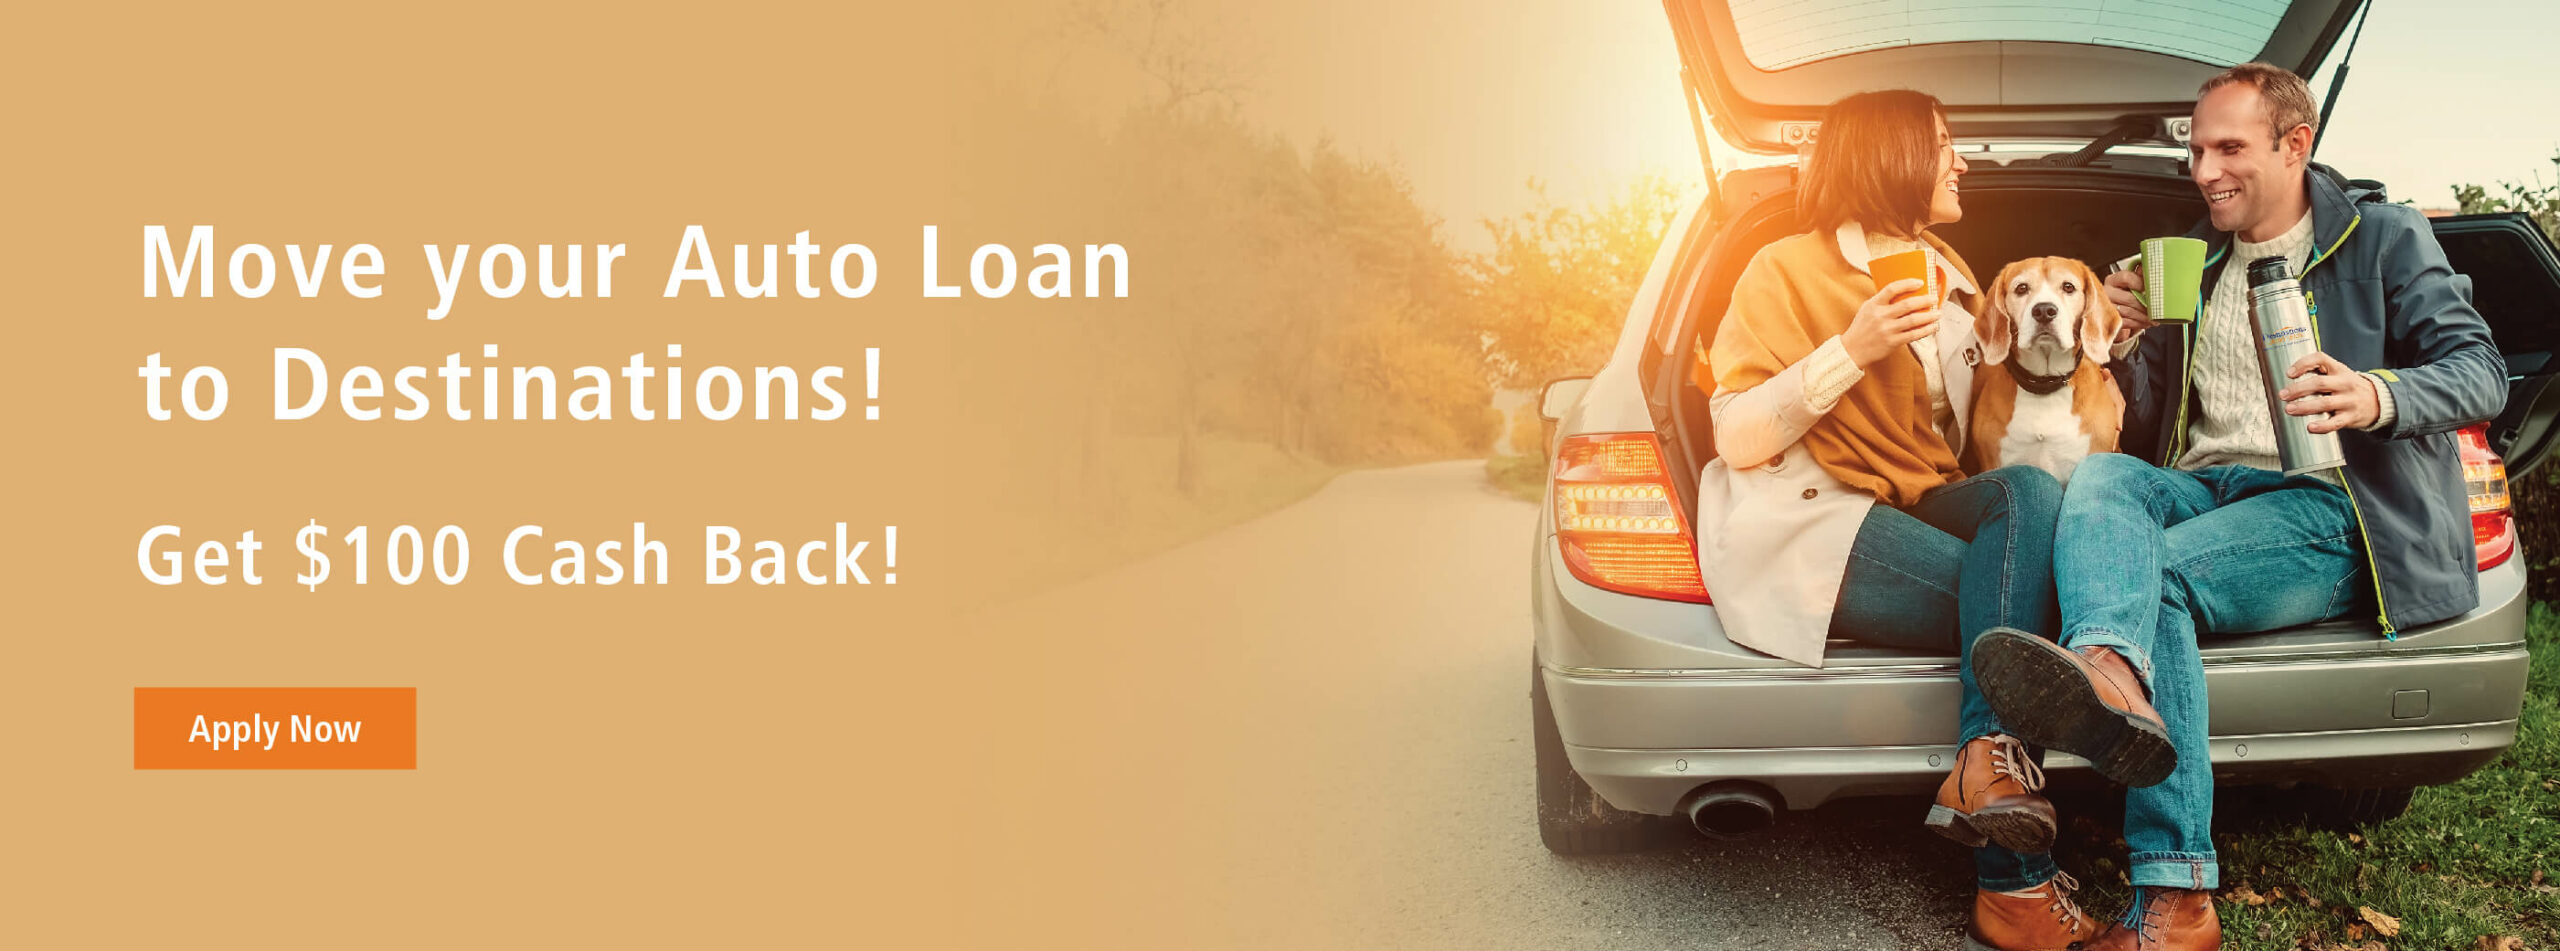 Auto Loan Home Page Banner